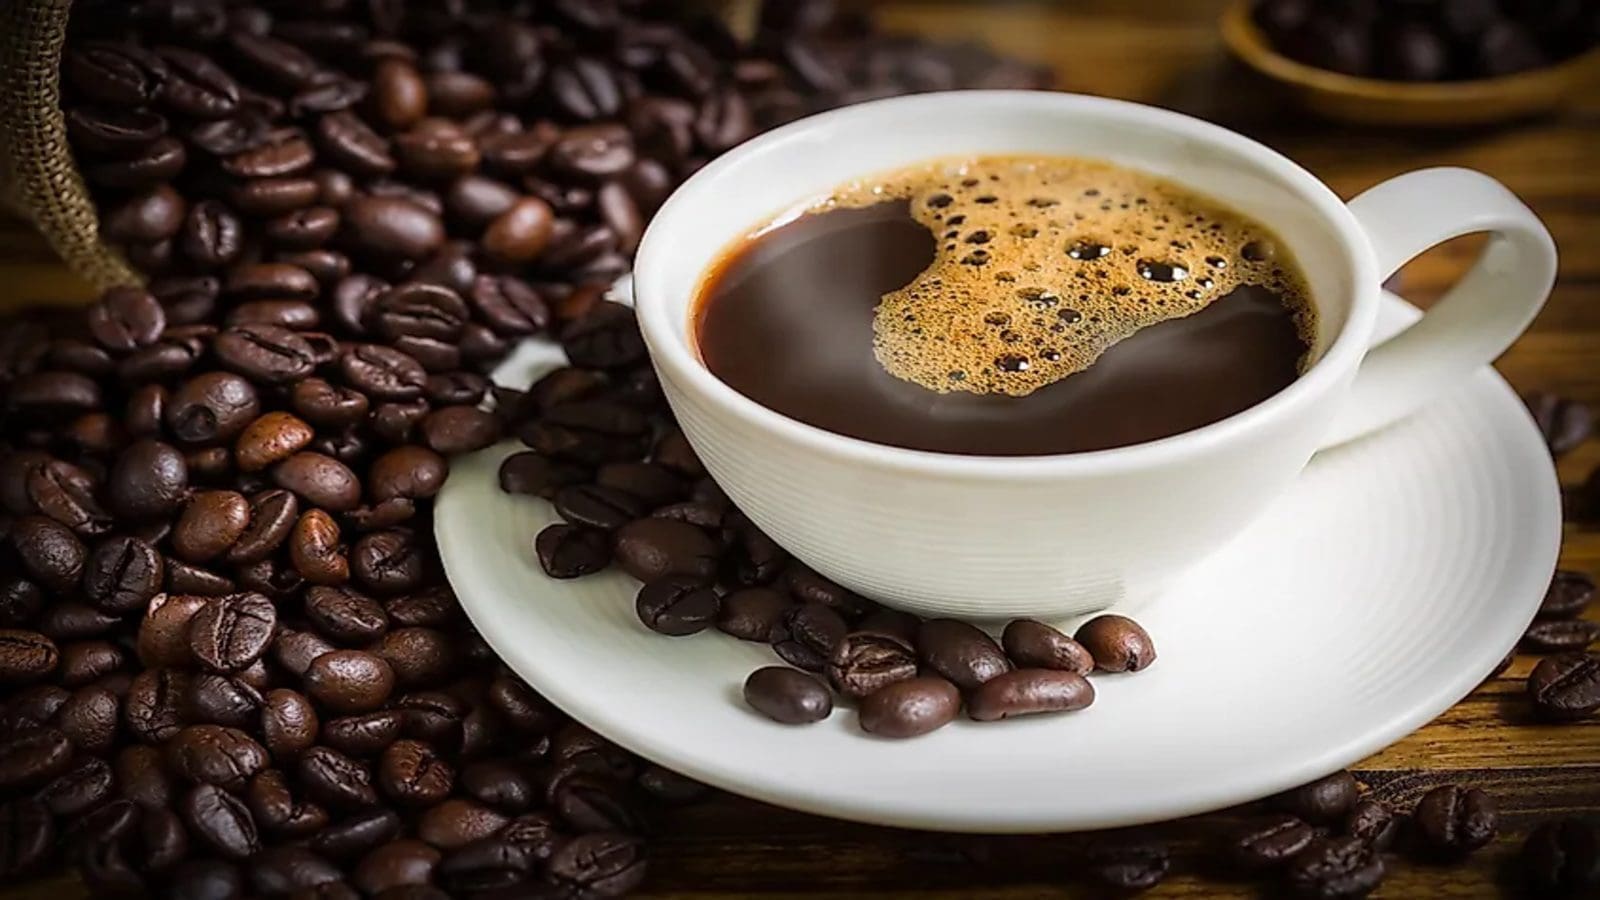 Coffee drinking lowers mortality rate by around 30%, finds UK study